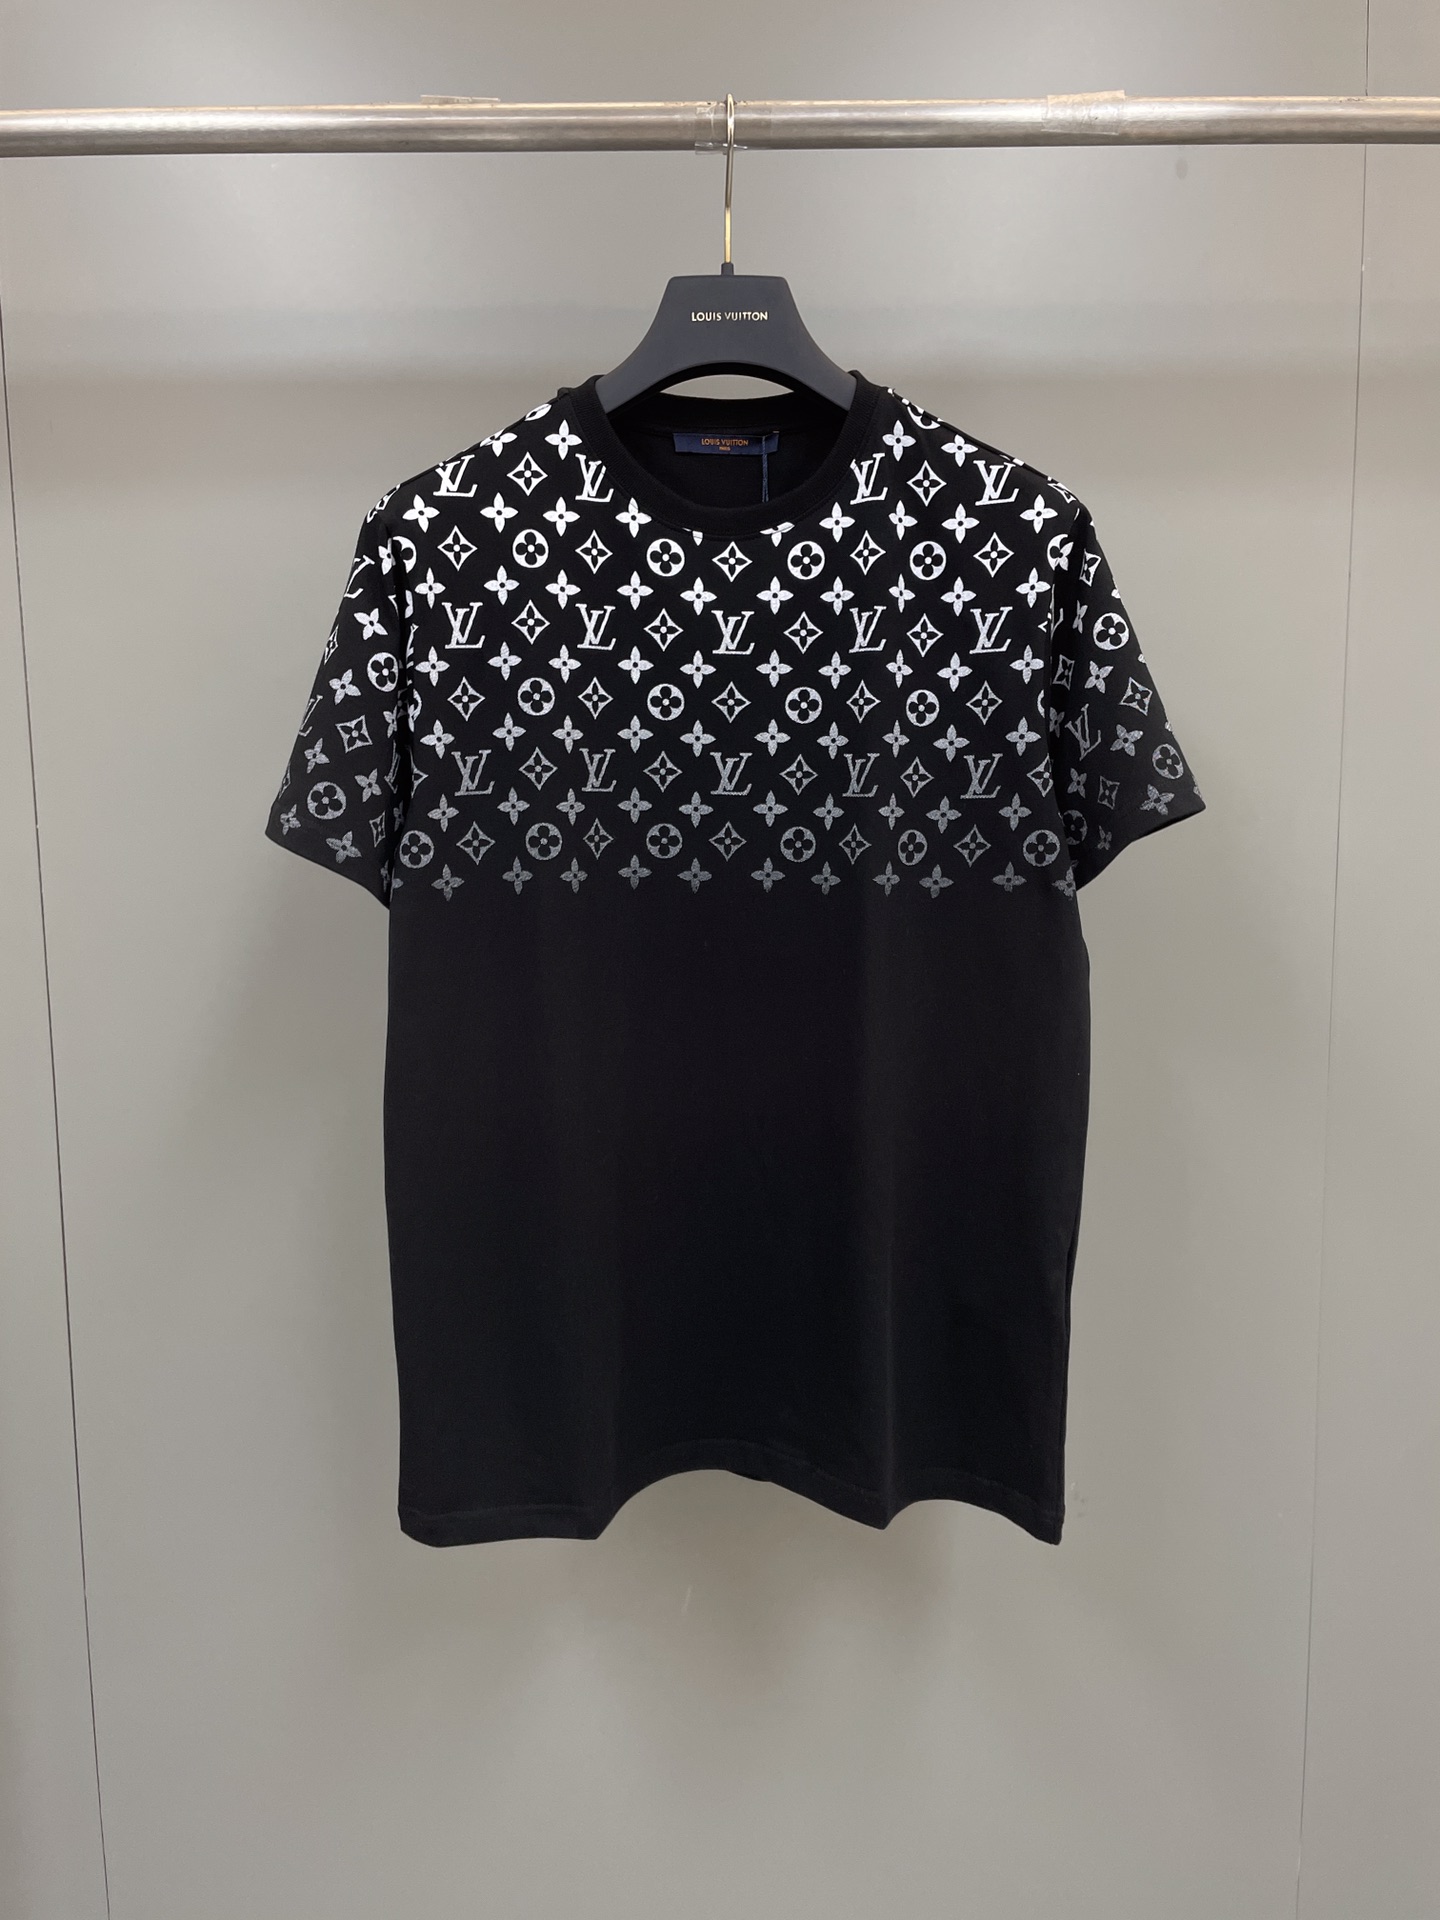 Louis Vuitton Clothing T-Shirt Black White Cotton Knitting Fall/Winter Collection Casual